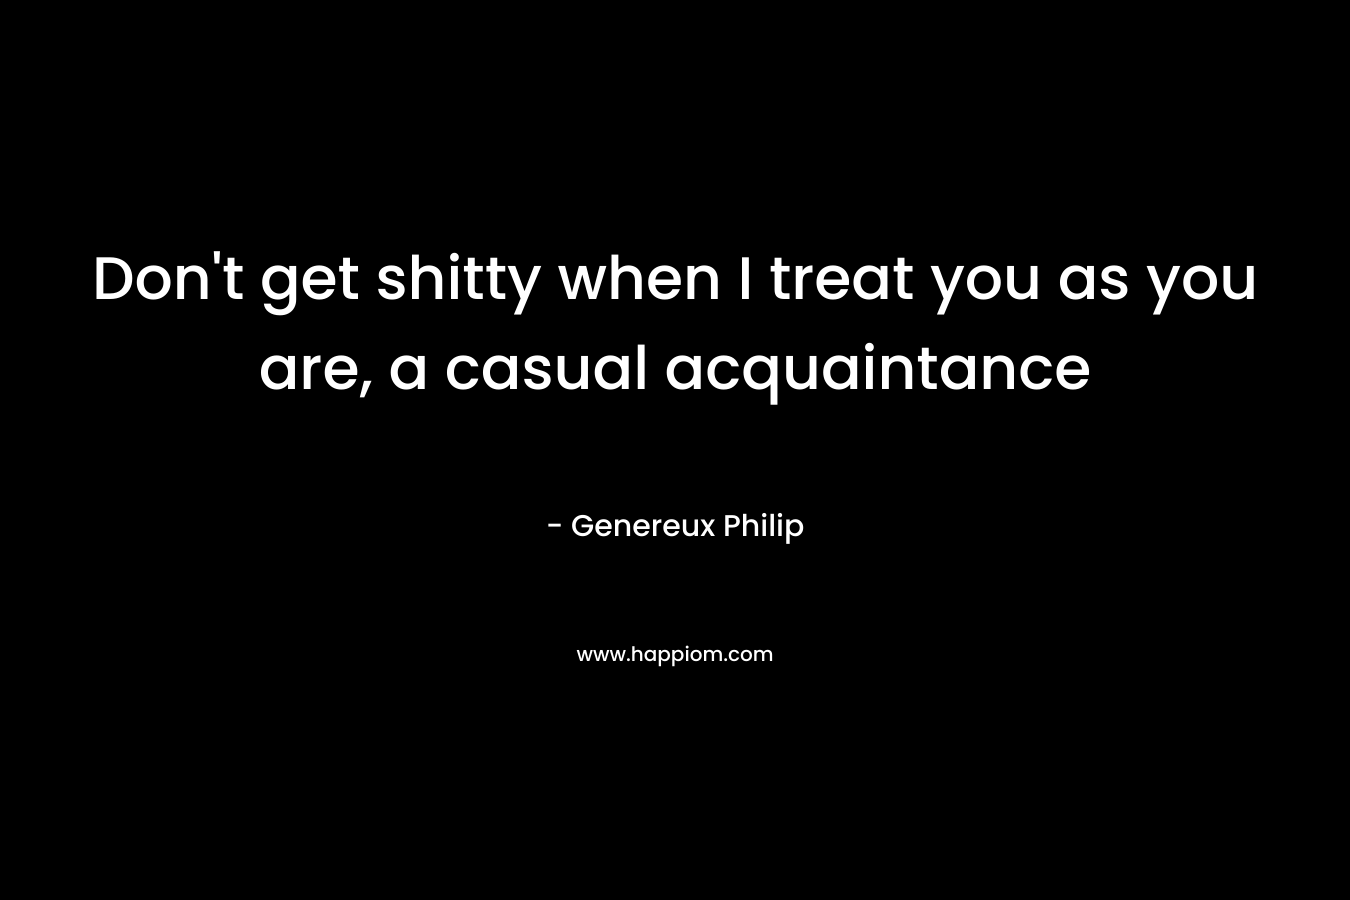 Don’t get shitty when I treat you as you are, a casual acquaintance – Genereux Philip